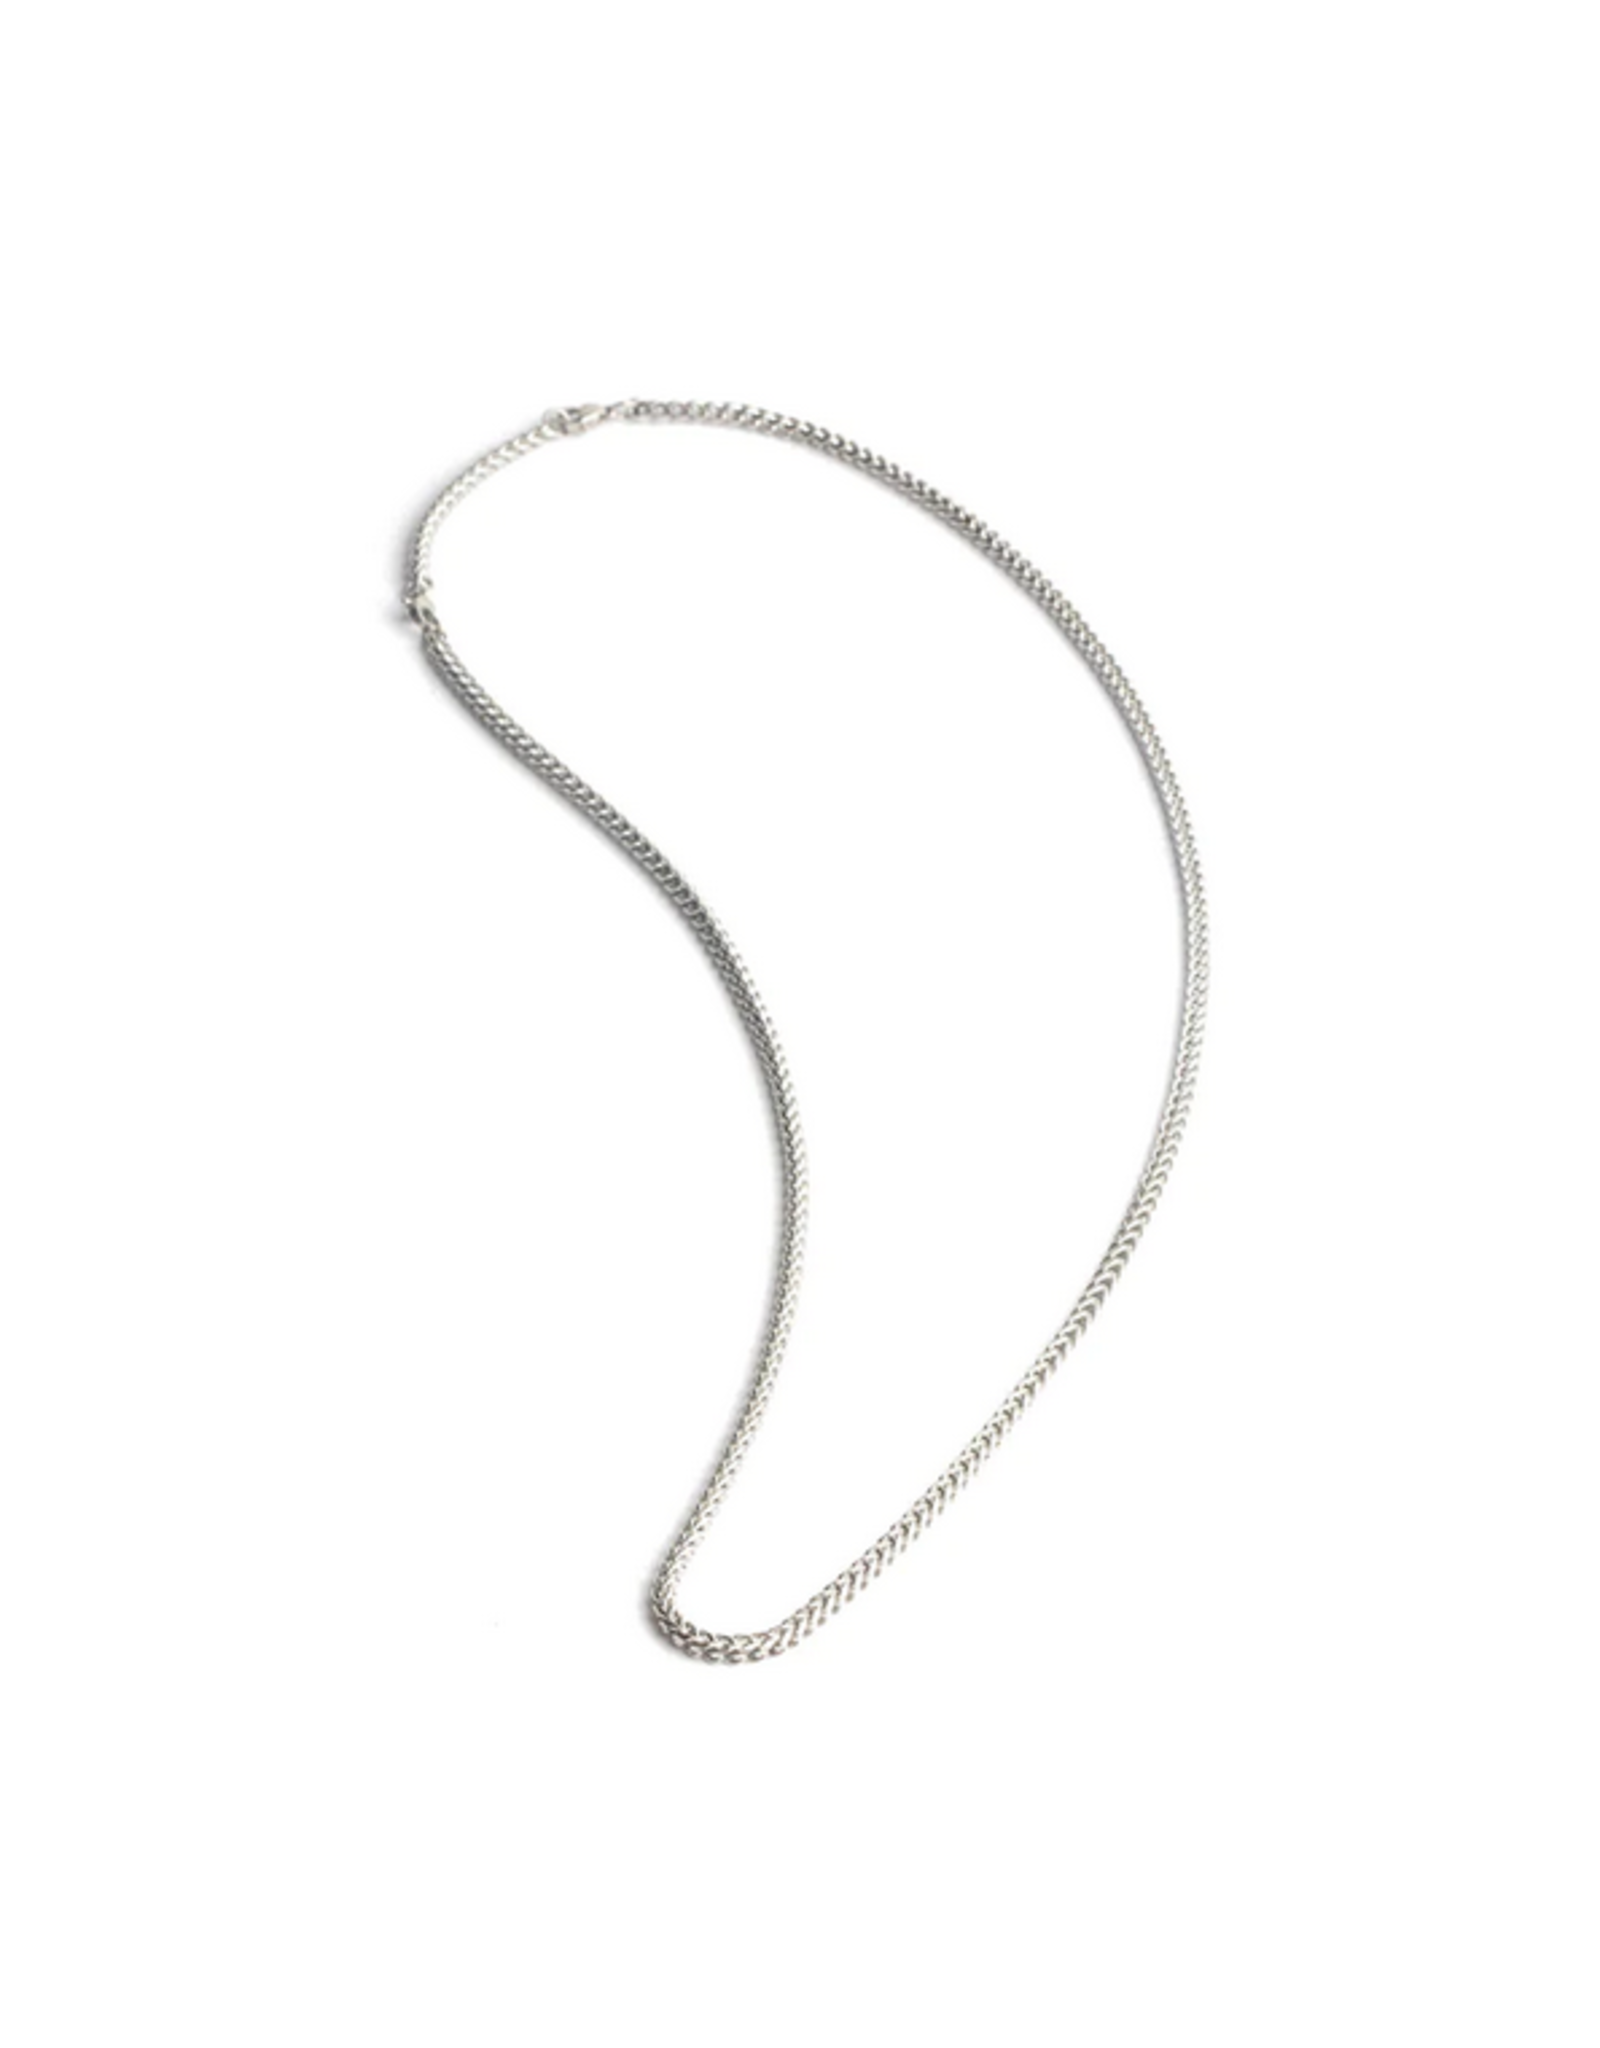 Gemini 3mm Stainless Steel Foxtail Necklace with Silver Plated Finish